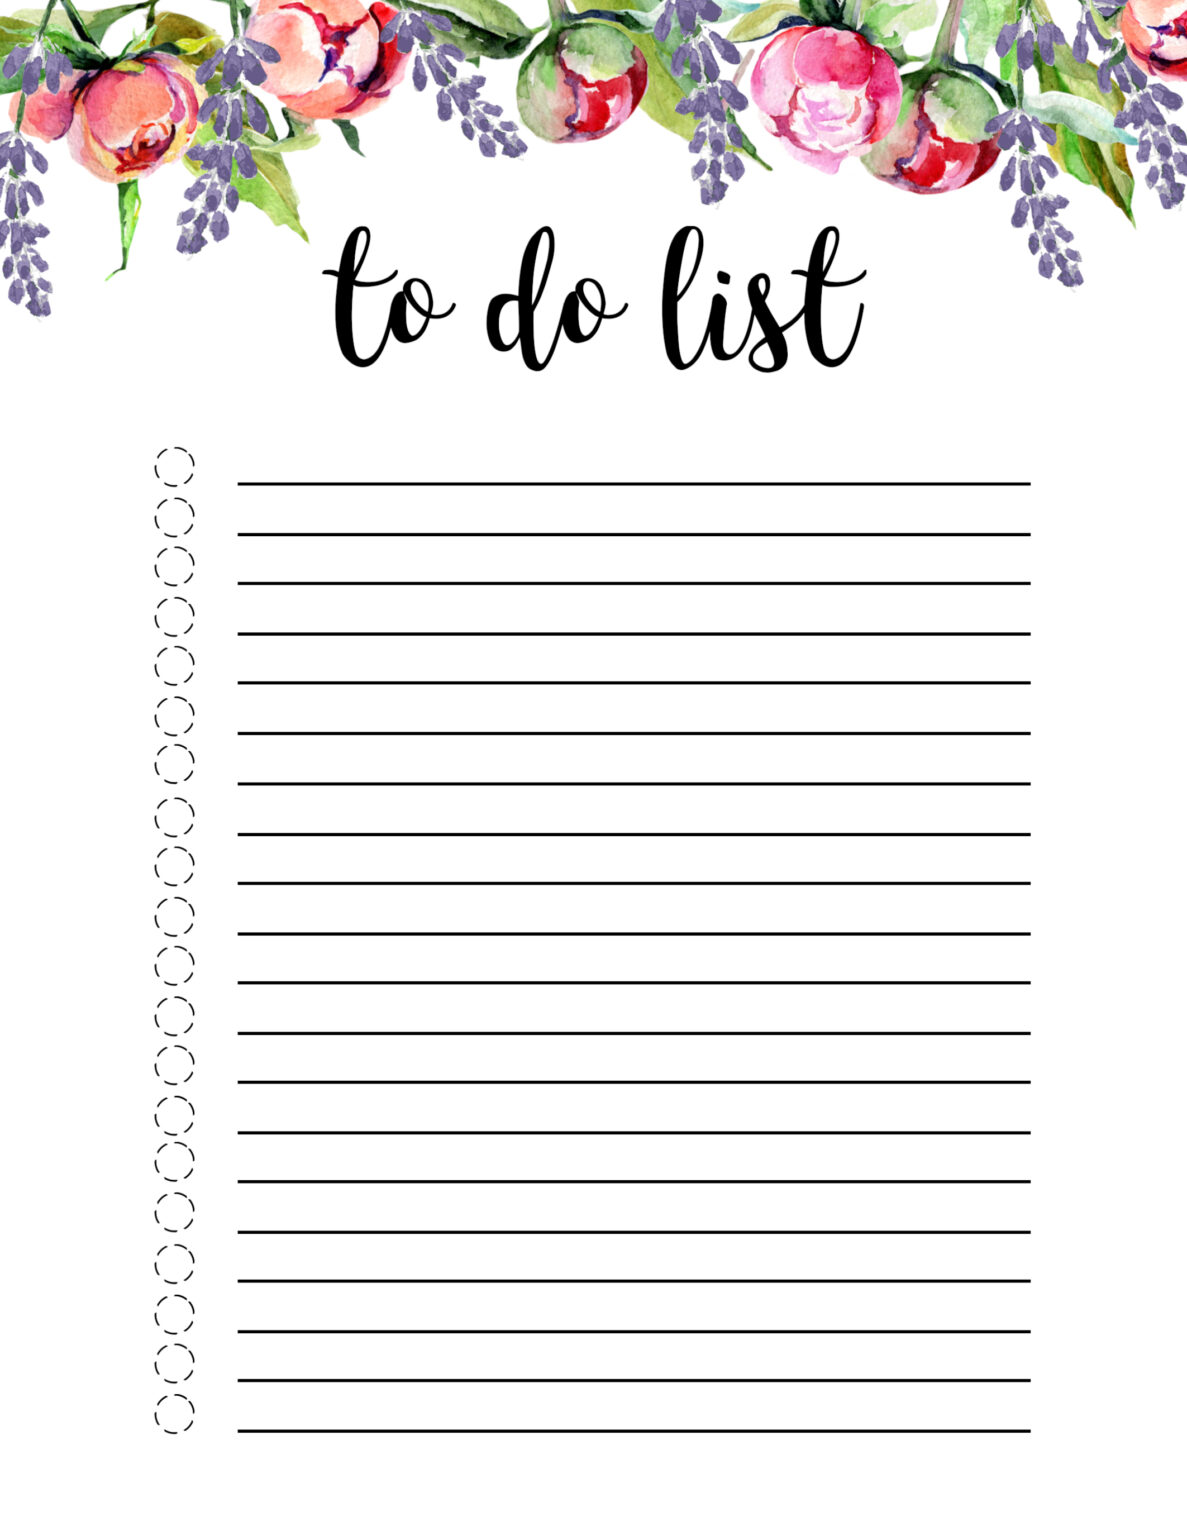 to-do-list-template-word-awesome-15-free-task-list-templates-smartsheet